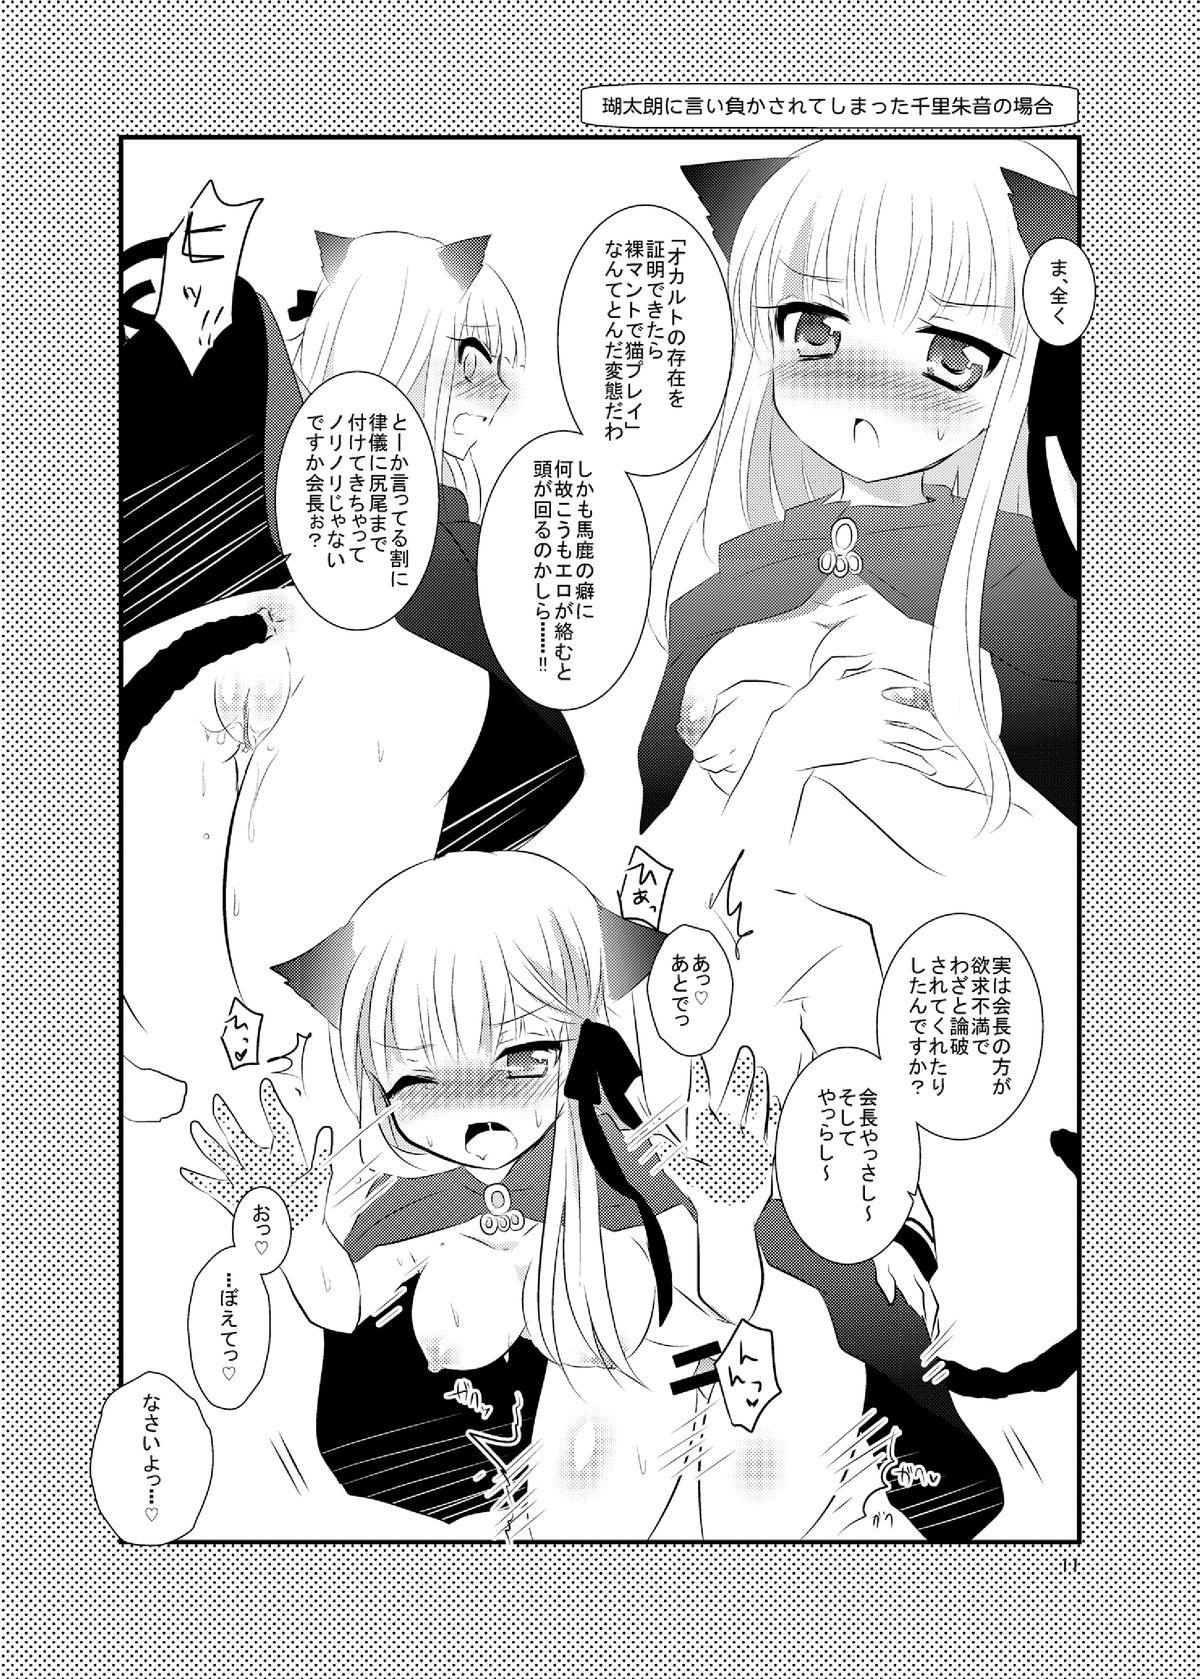 Foreplay Harvest you! - Rewrite Holes - Page 10